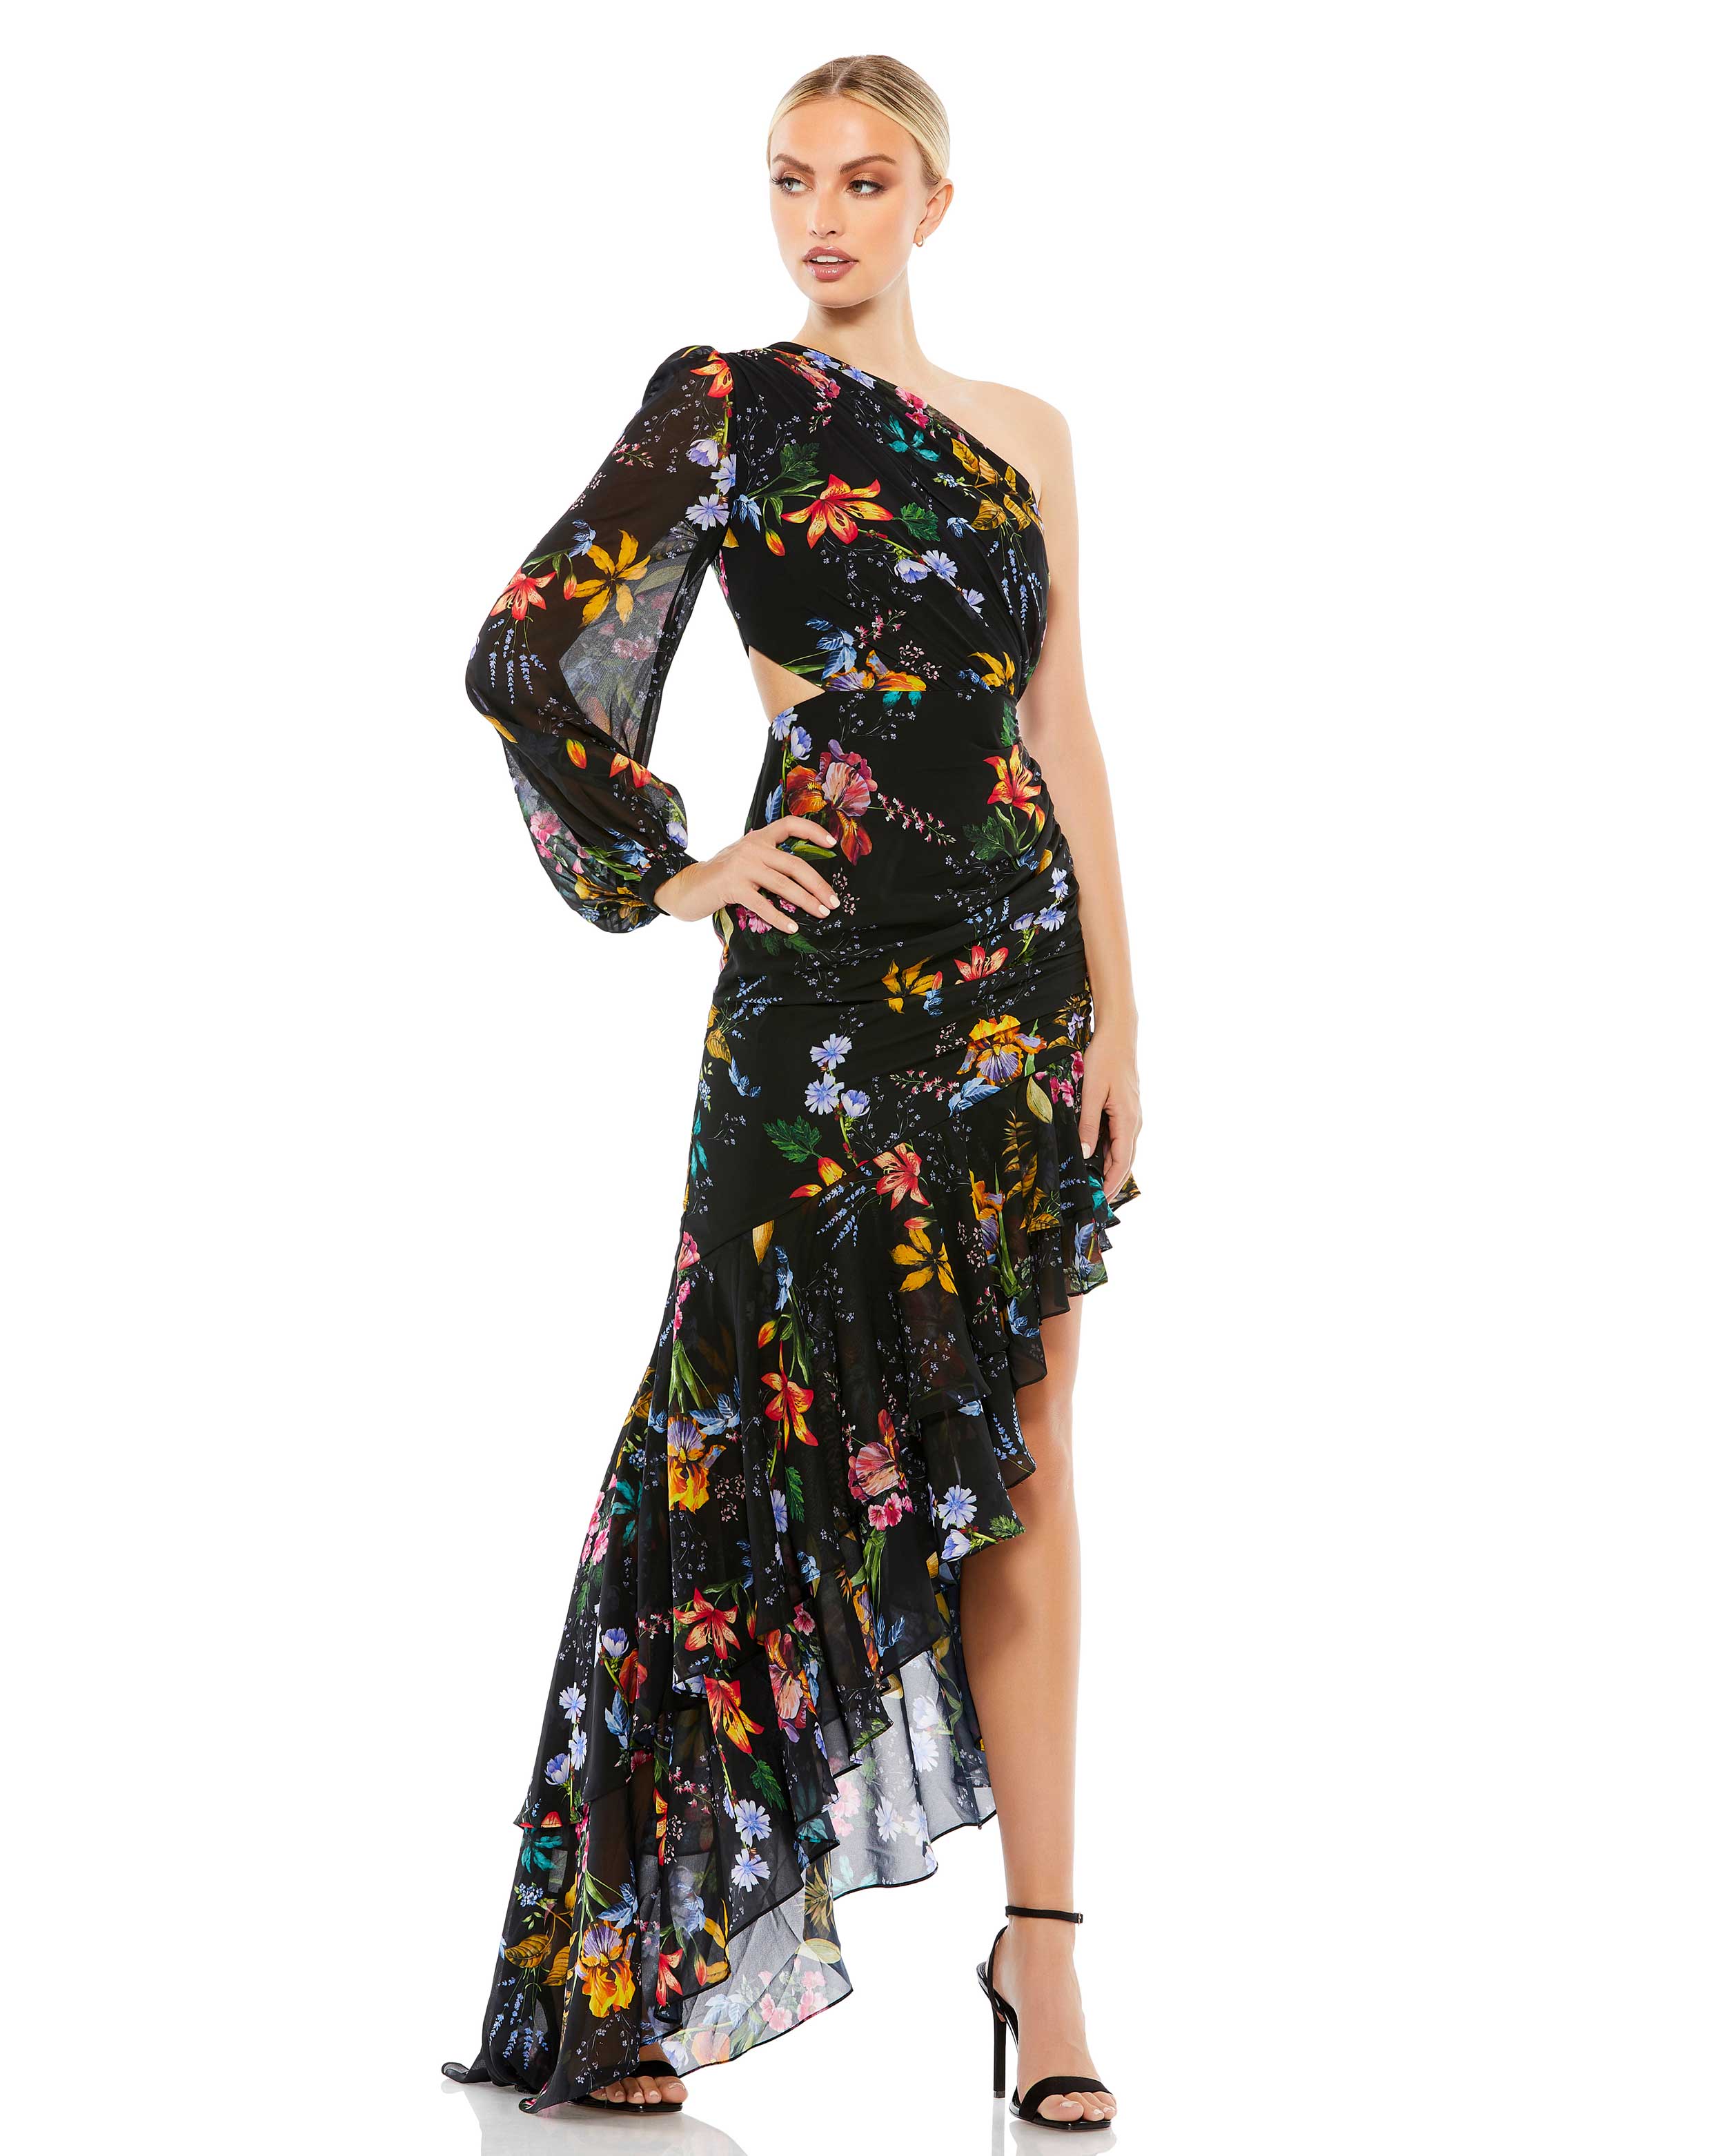 Floral One Sleeve Cut Out Dress - FINAL SALE